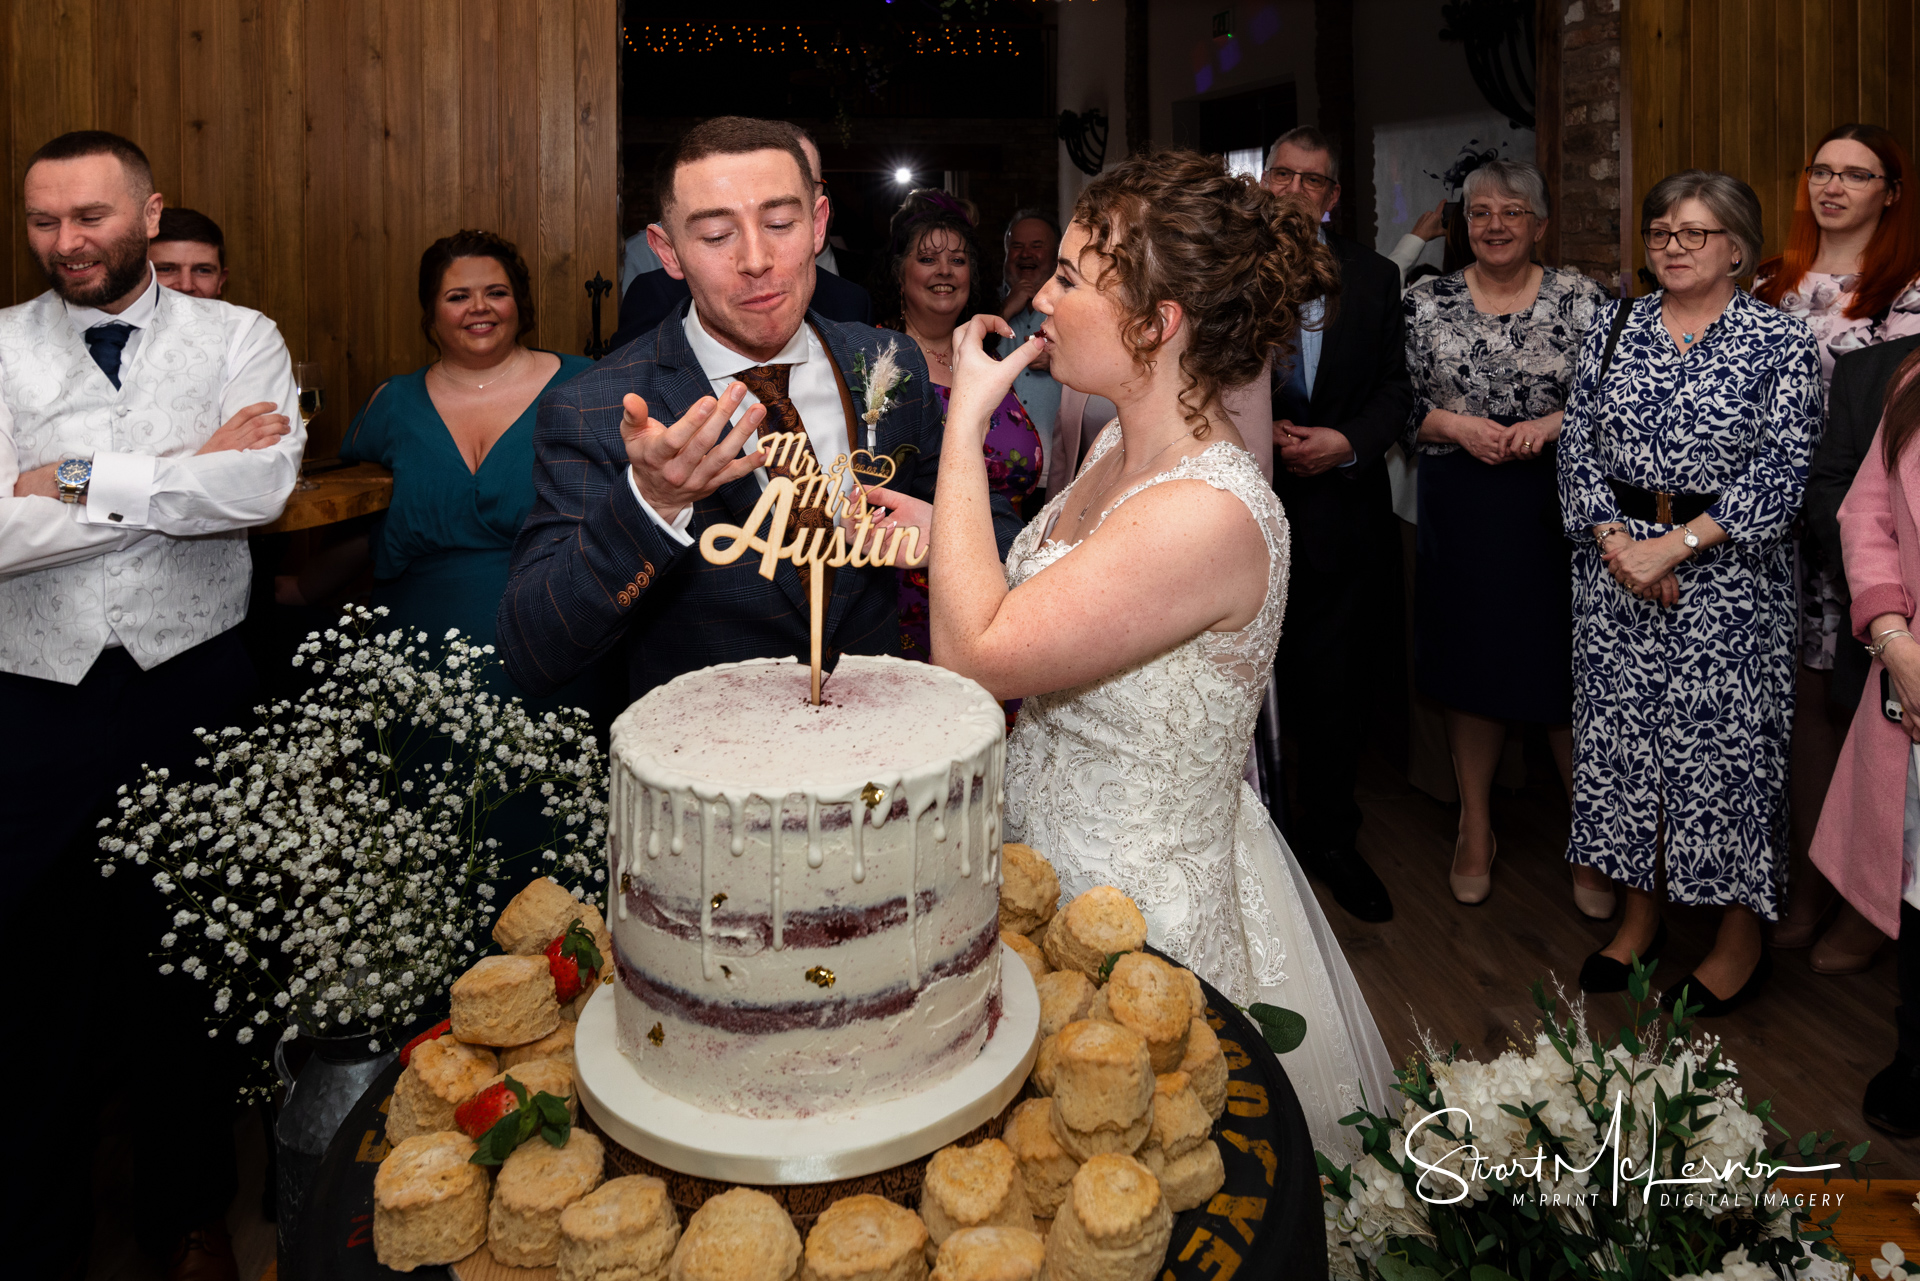 The bride and groom lick their fingers after cutting the cake